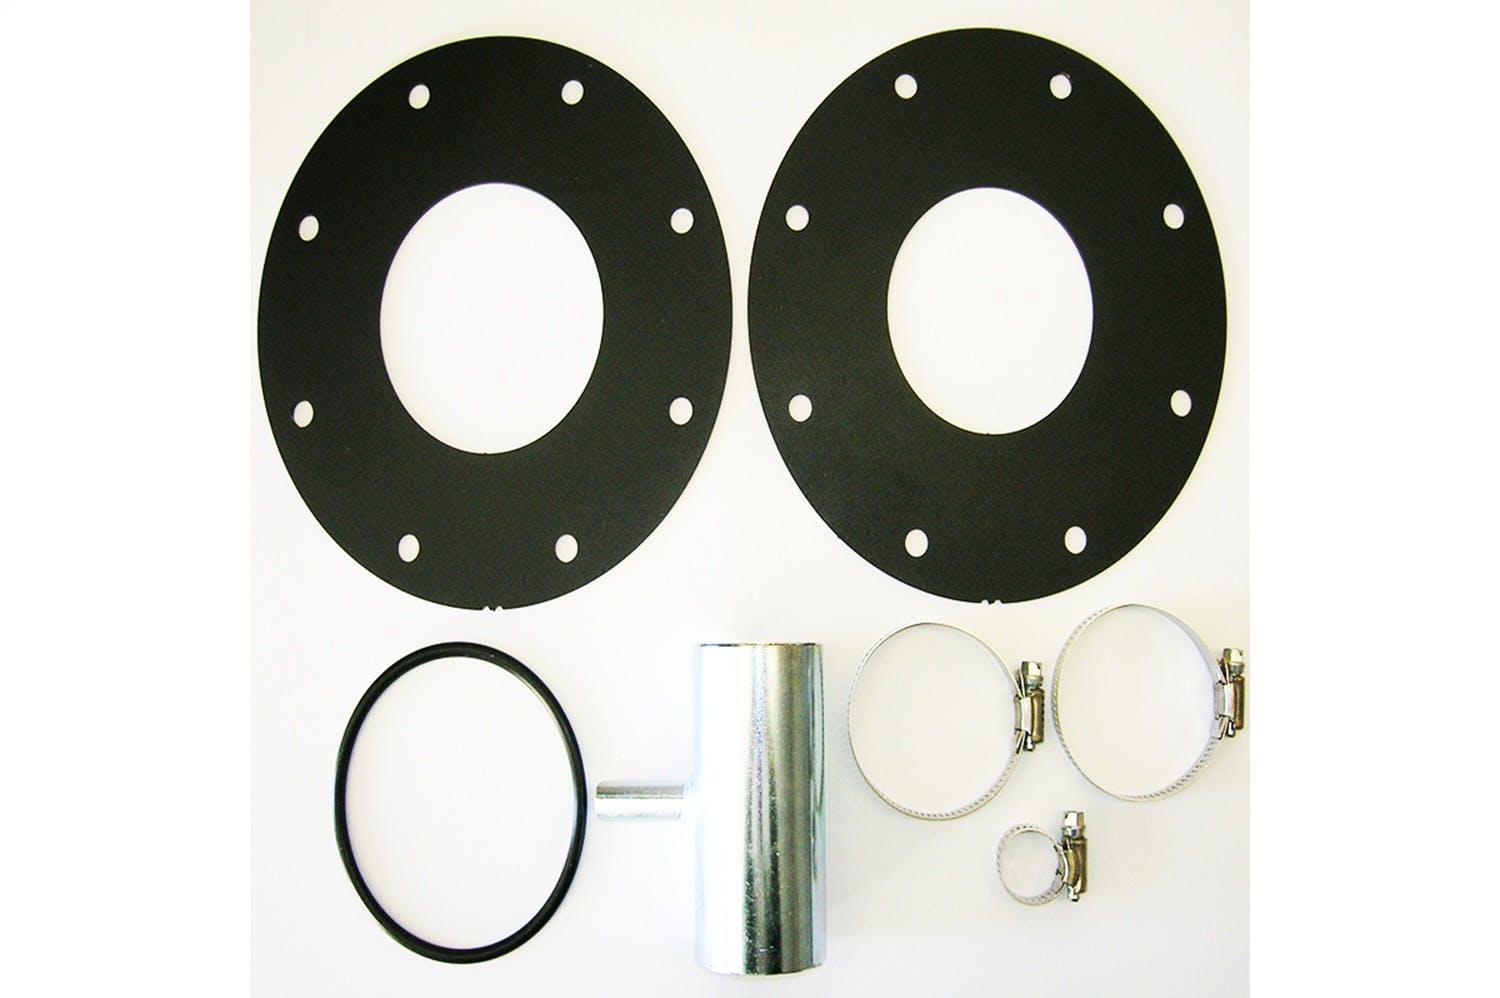 TITAN Fuel Tanks 0101310 LB7 Kit for Spare Tire System Two Heavy Duty Hose Clamp and One Double-Tee Adapter